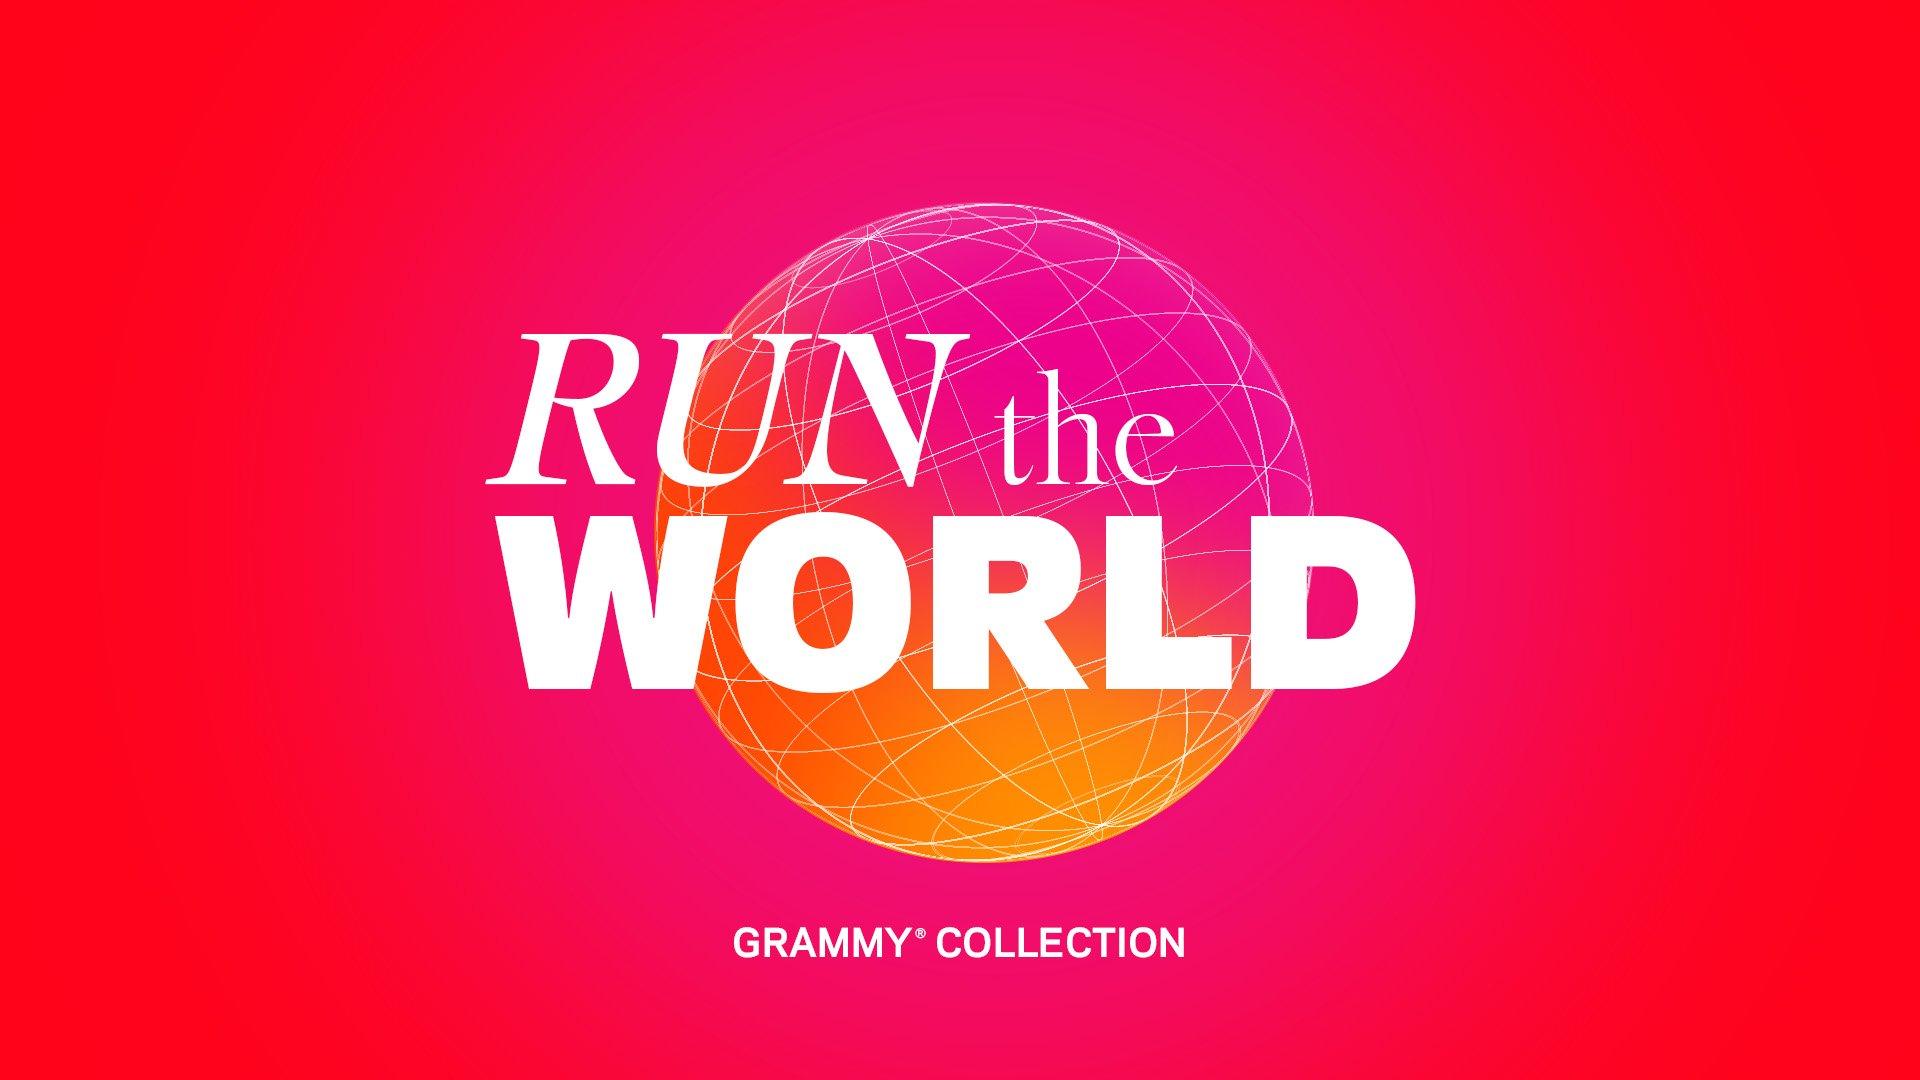 The series logo for the Recording Academy's Run The World video series. The words "Run The World" are written in white on top of a red and orange background that contains an image of the world.